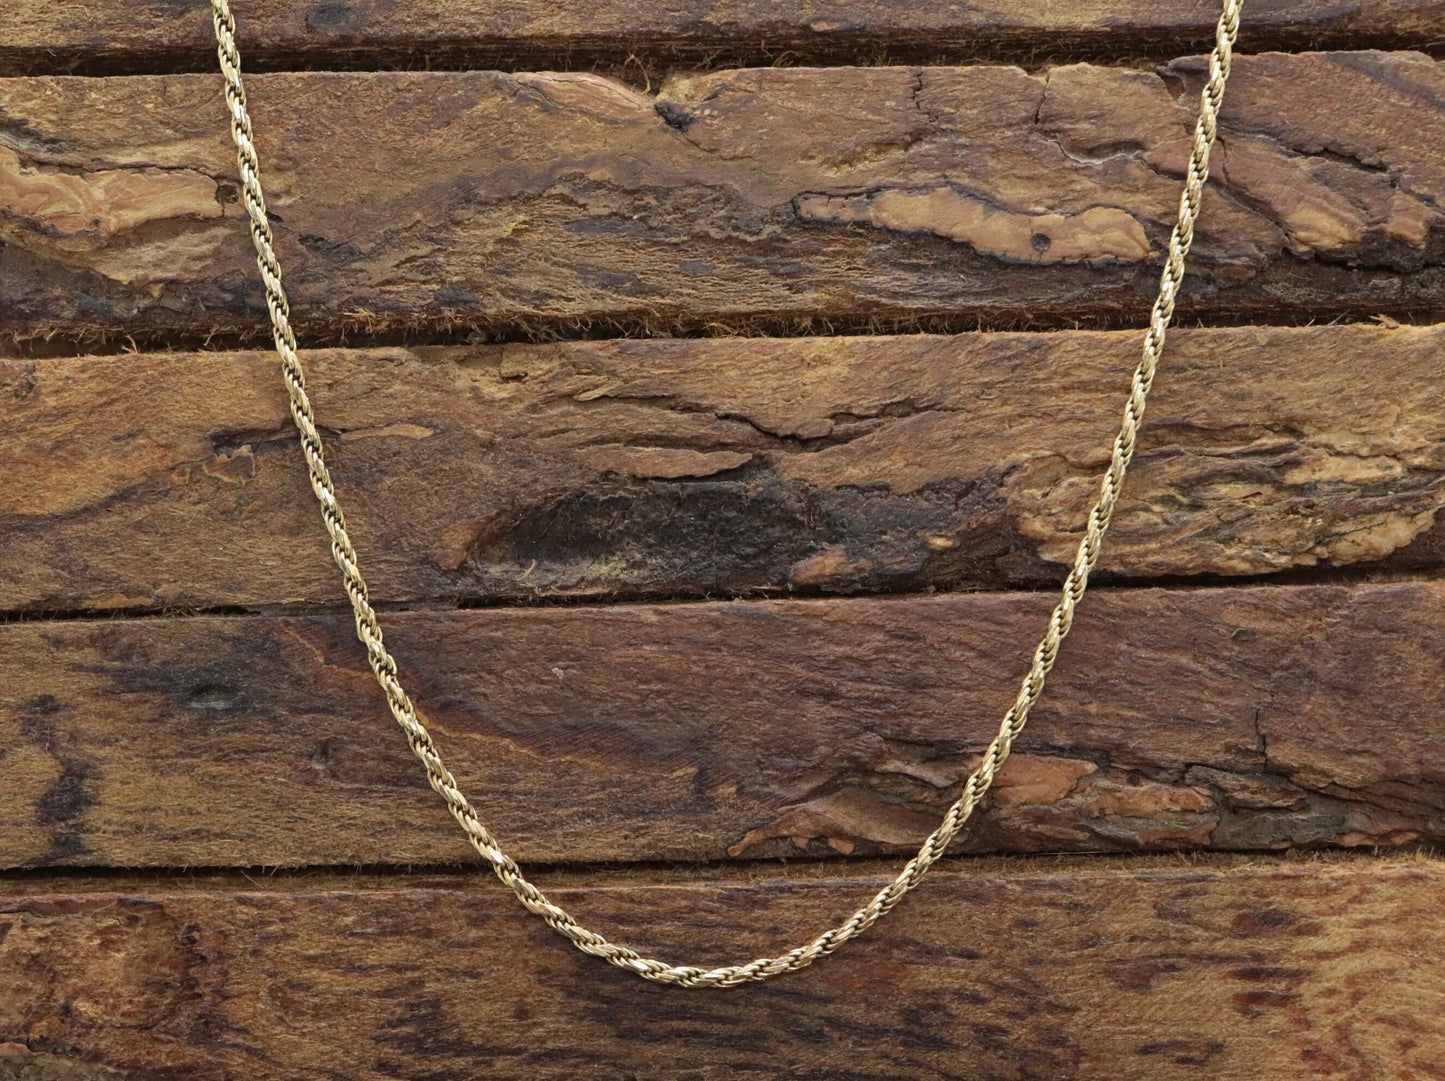 14k Rope Necklace. 14k Long Rope Necklace. 3.5grams 16in length 1.5mm width st(57/50)